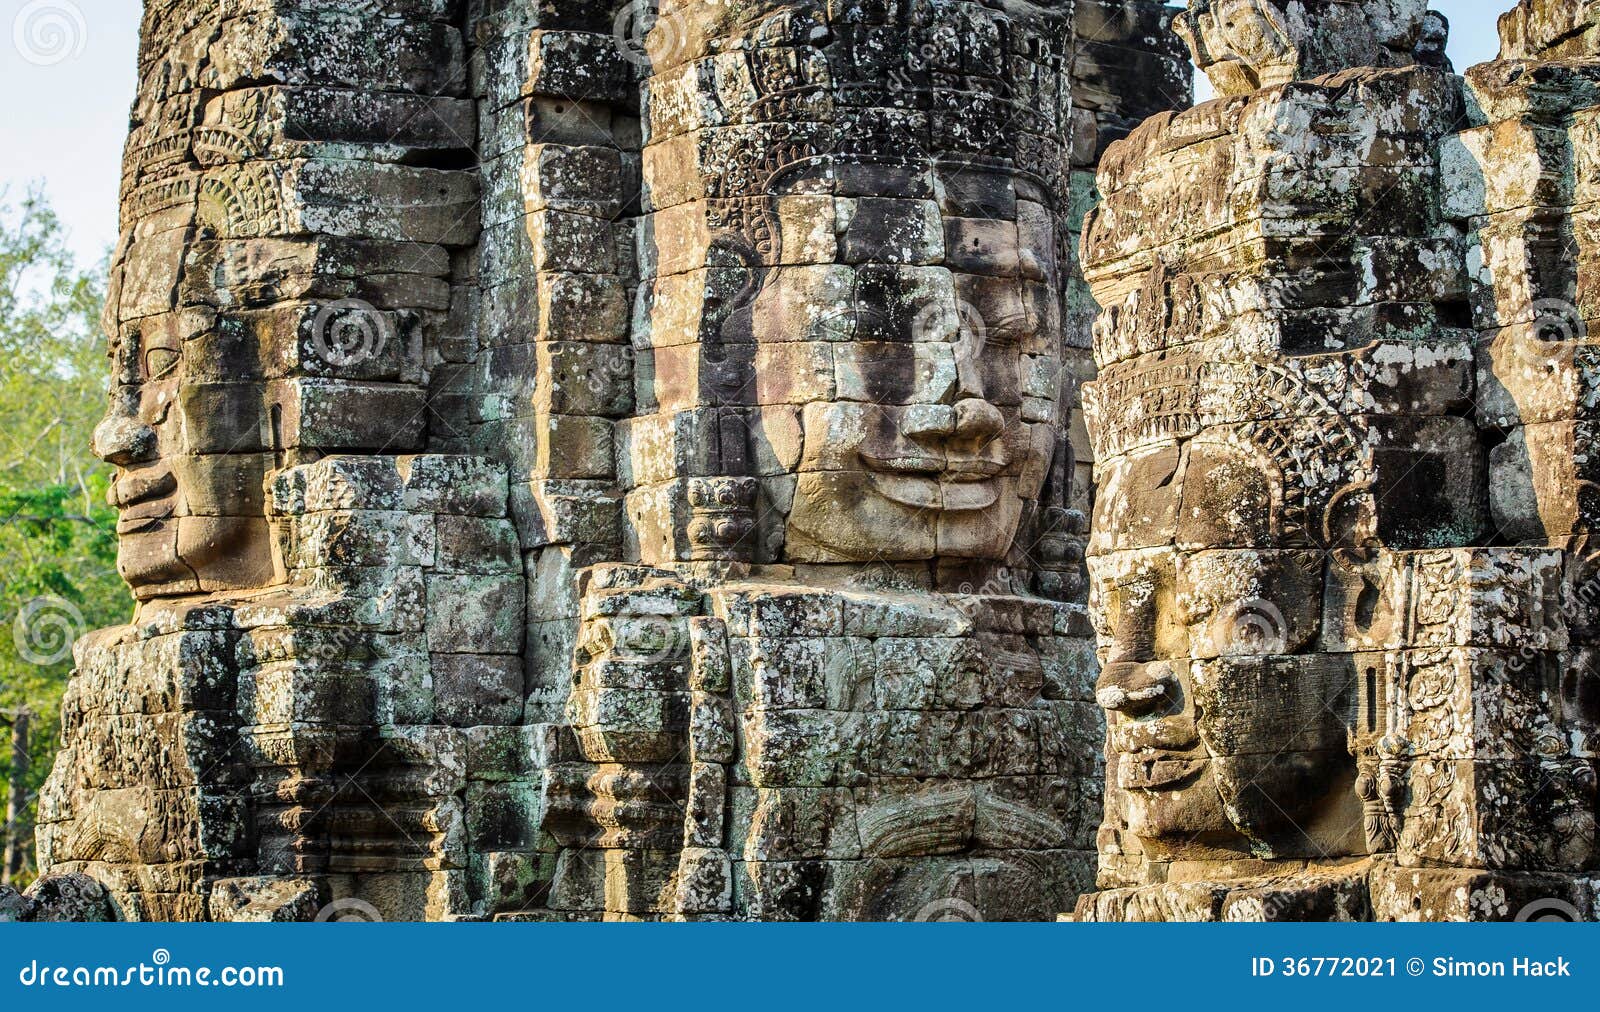 stone faces at the bayon temple in siem reap,cambodia 2